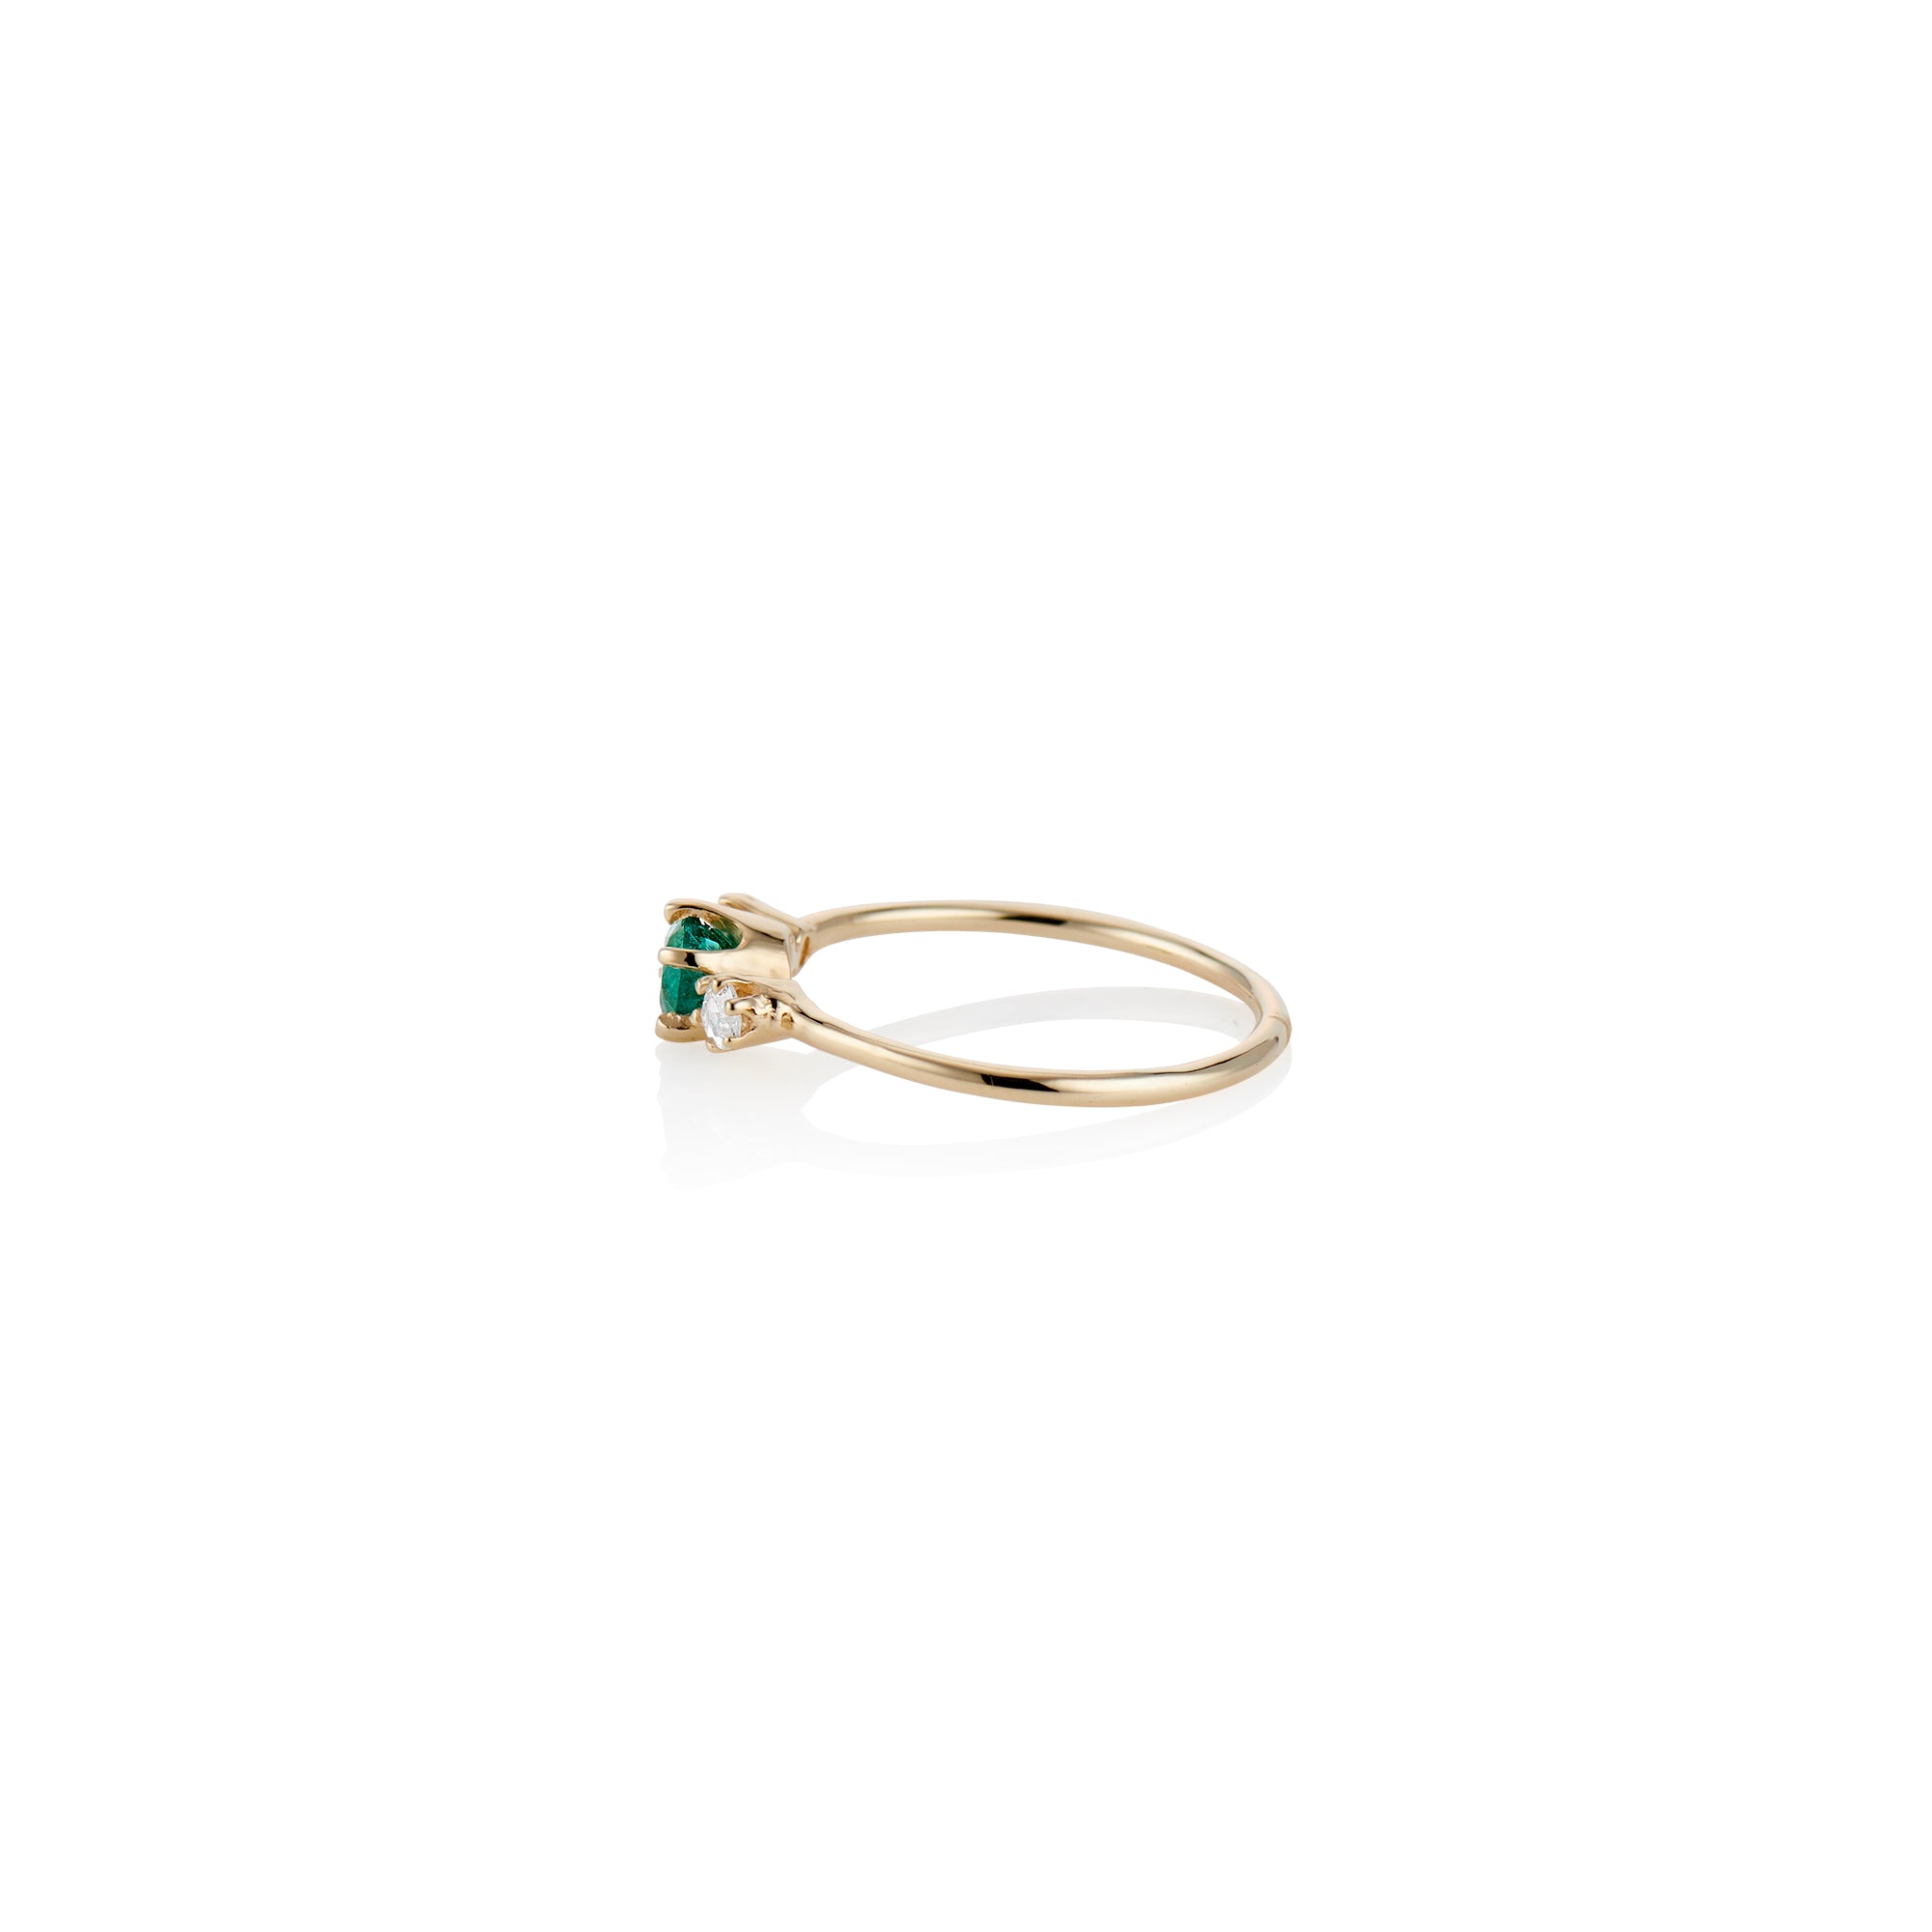 Darling Emerald Ring - Charlie and Marcelle